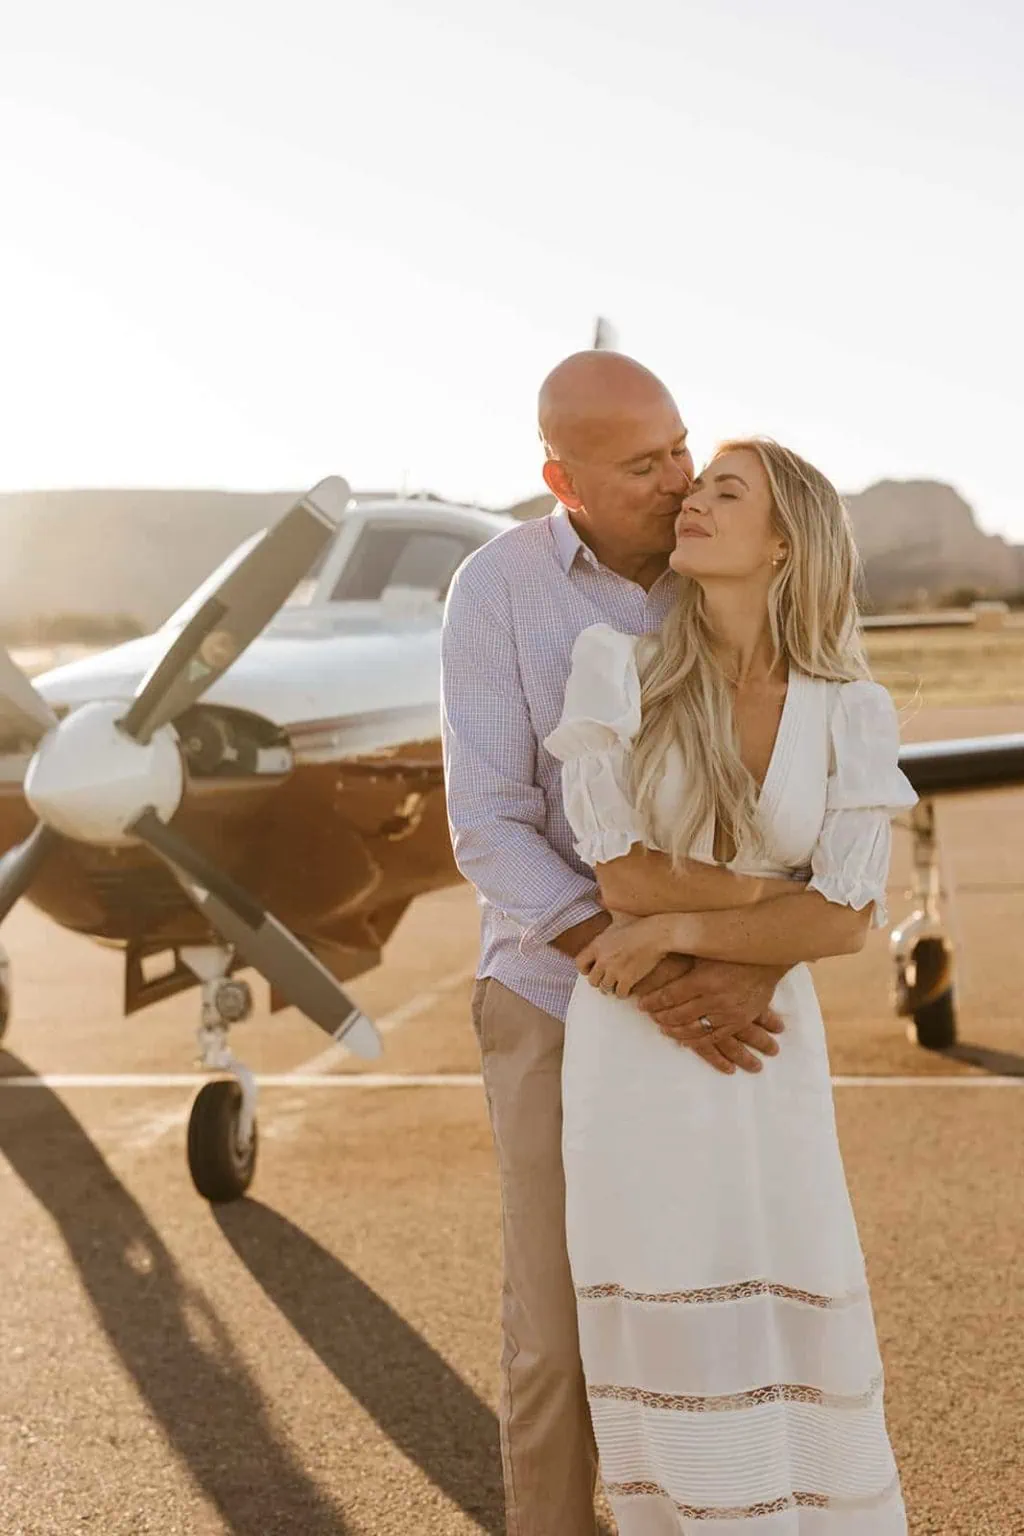 A man holds his partner in front of his airplane.